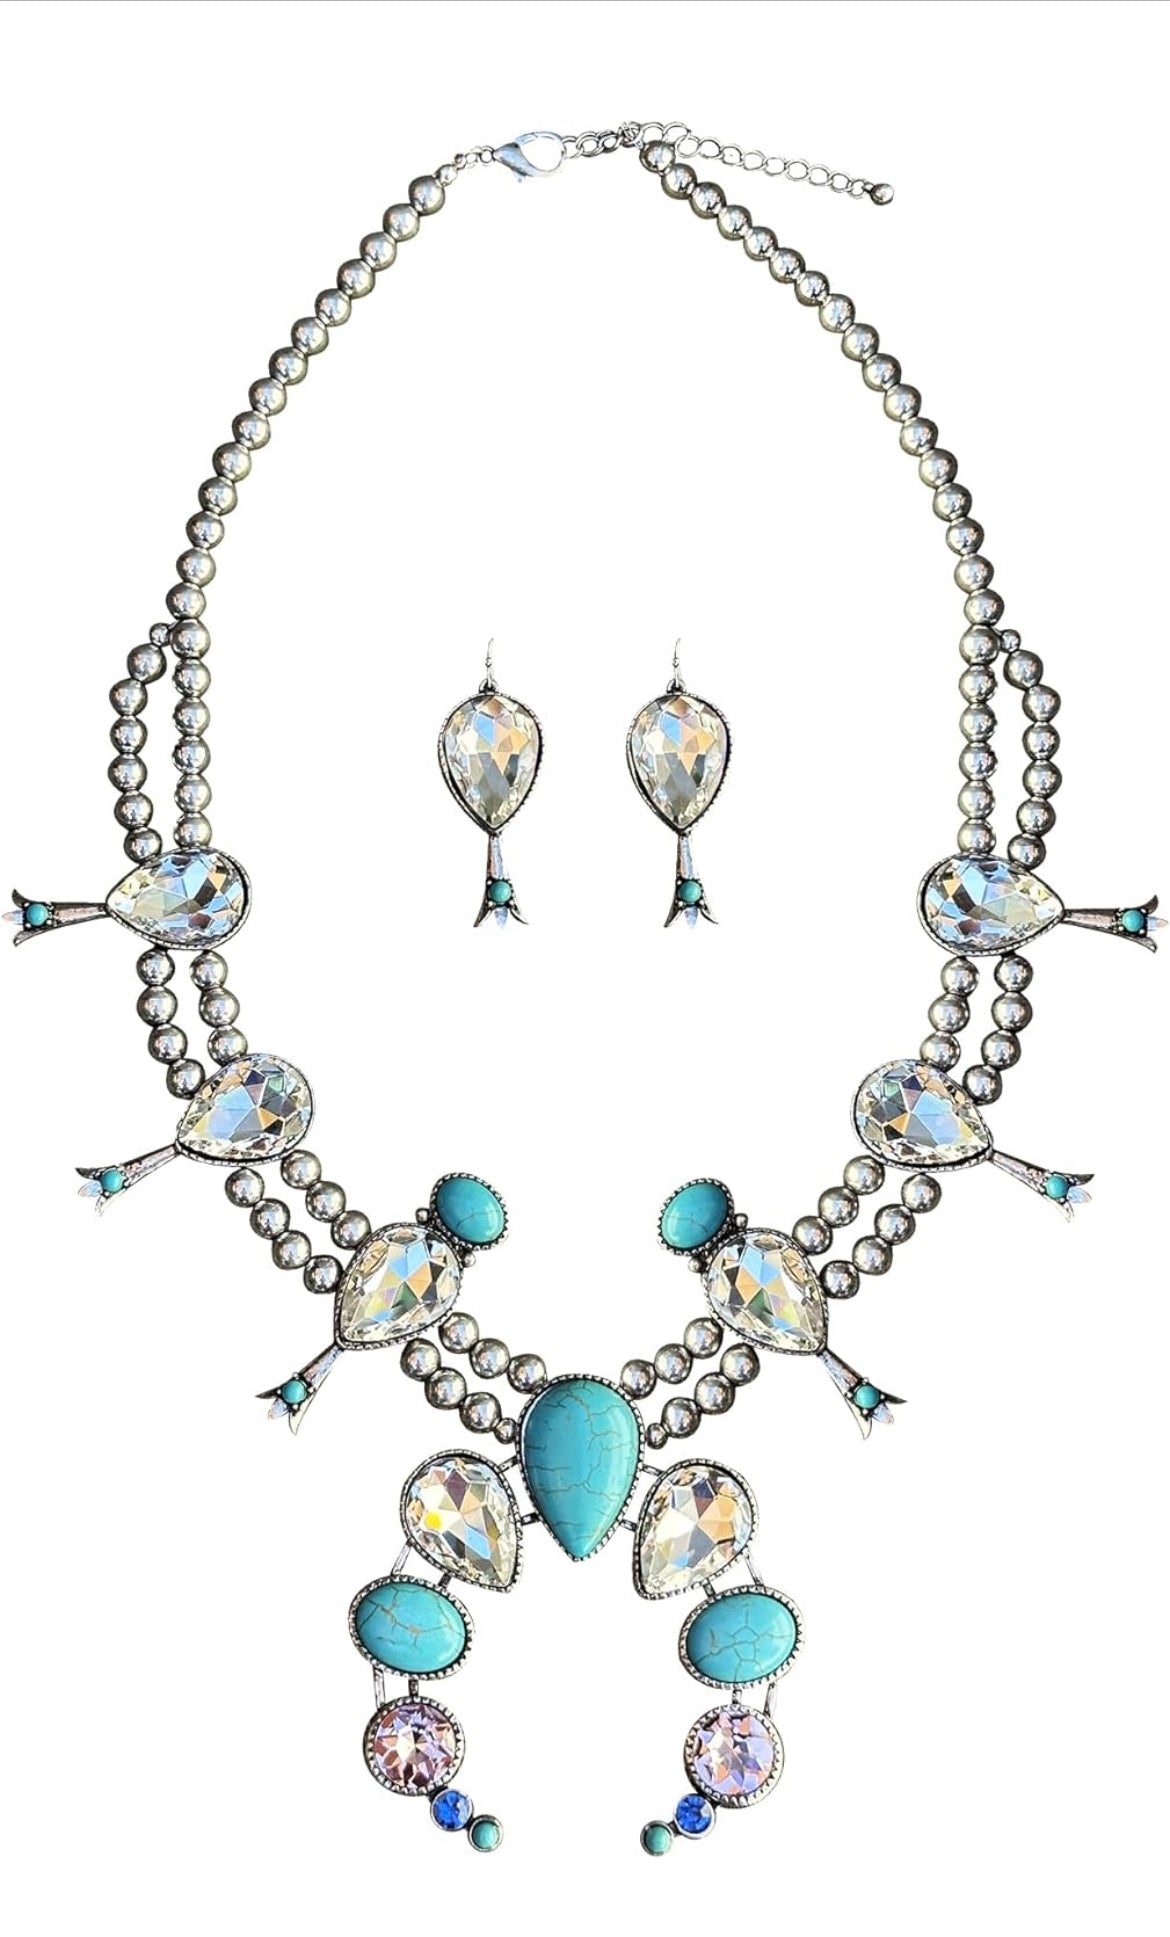 Parton Me Platinum Iridescent Crystal and Turquoise Naja Necklace and Earring Set